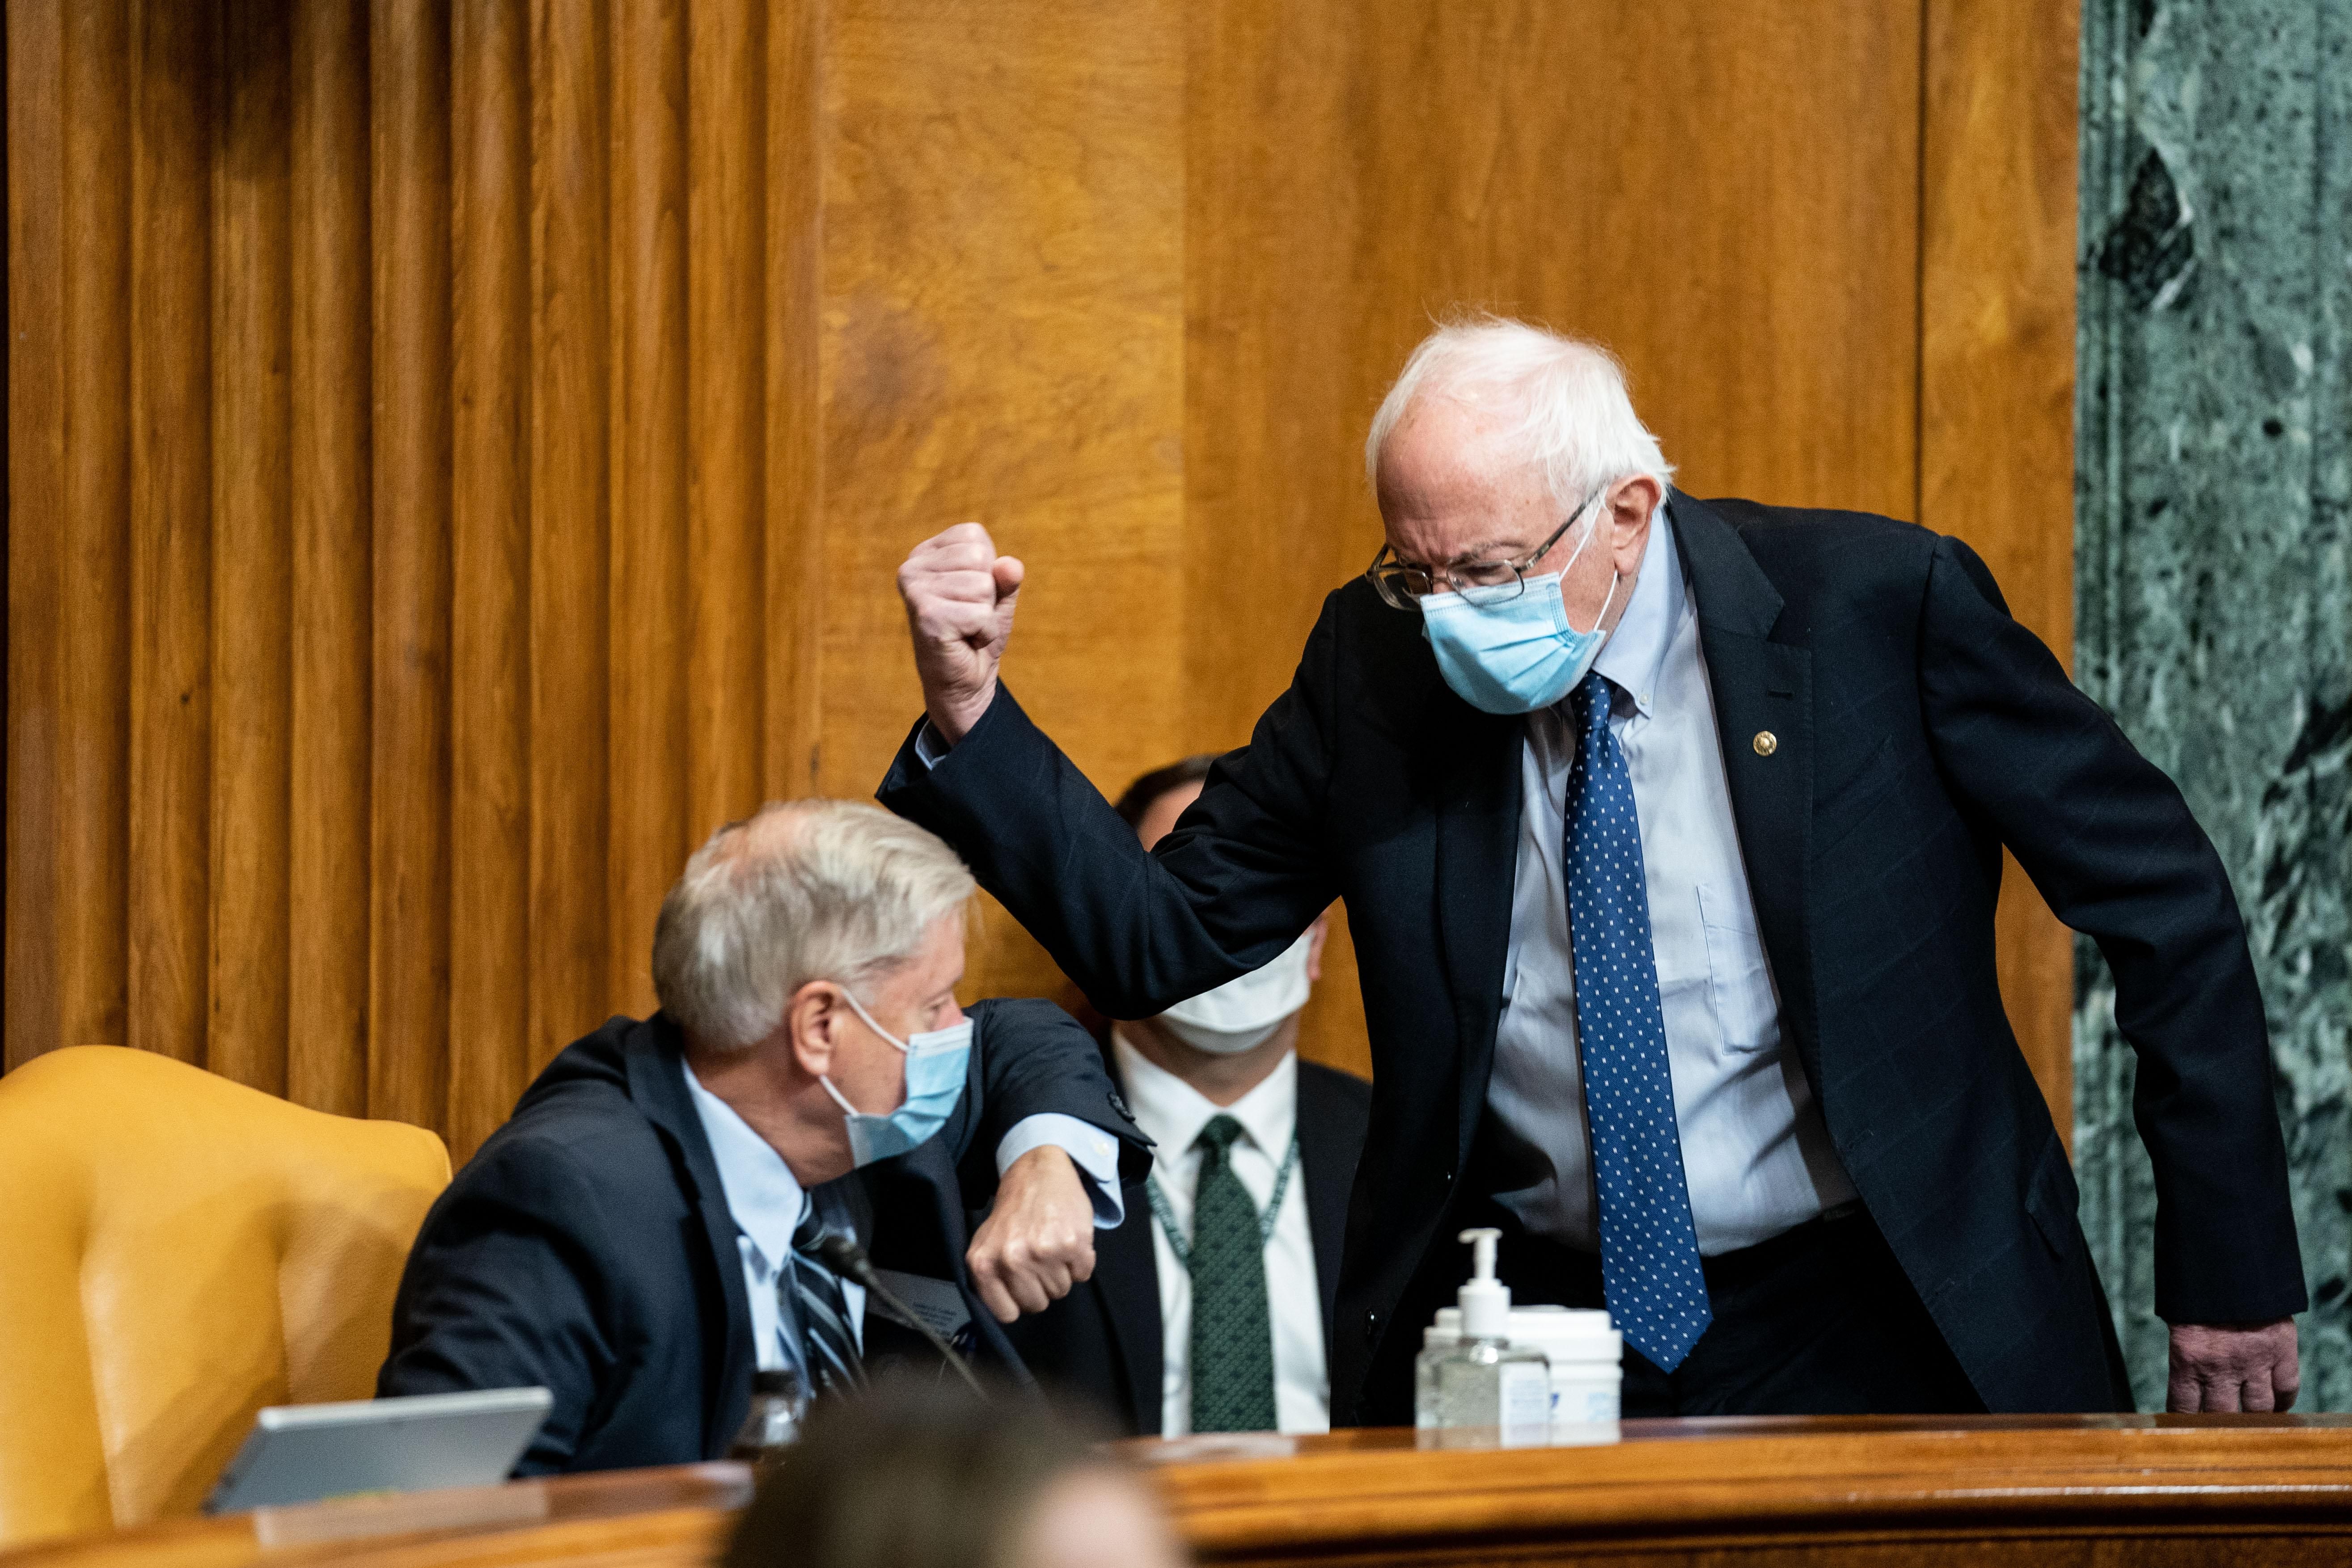 Senate Budget Committee Chairman Bernie Sanders (I-Vt.) and ranking member Sen. Lindsey Graham (R-S.C.) bump elbows prior to a hearing in Washington, D.C. on February 10, 2021.